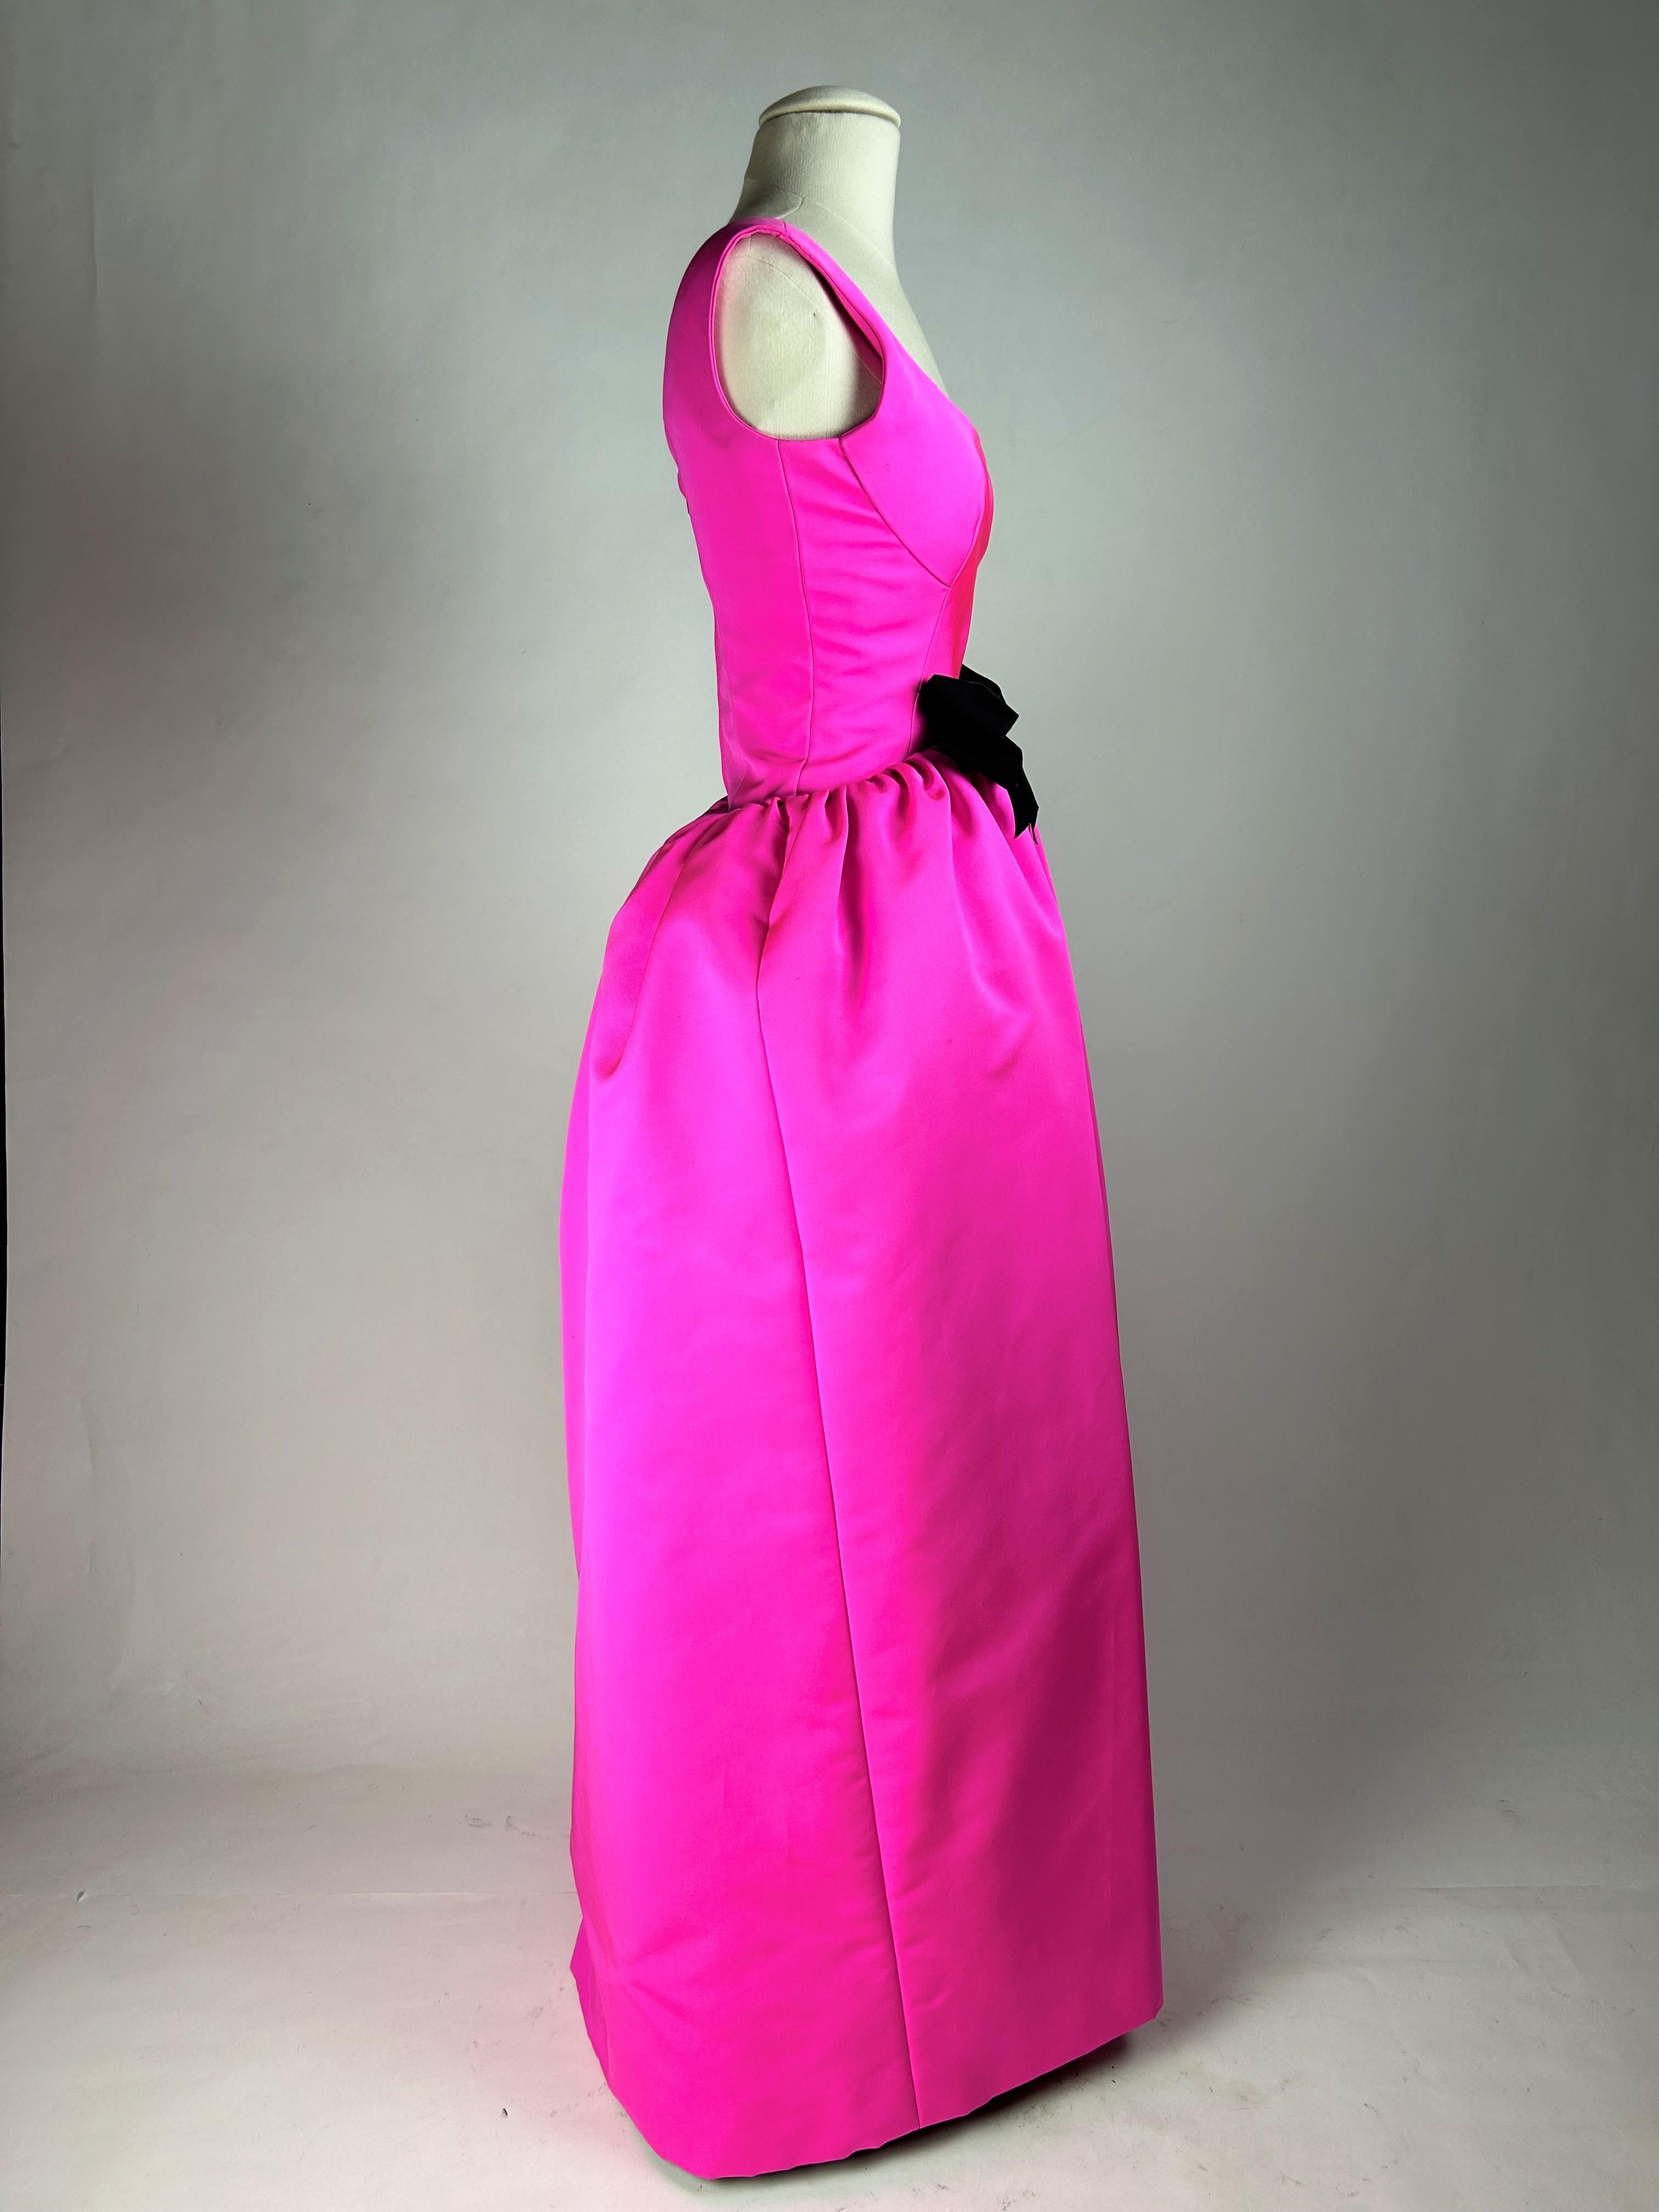 Women's Evening dress by Cristobal Balenciaga, Haute Couture (attributed to) Circa 1962